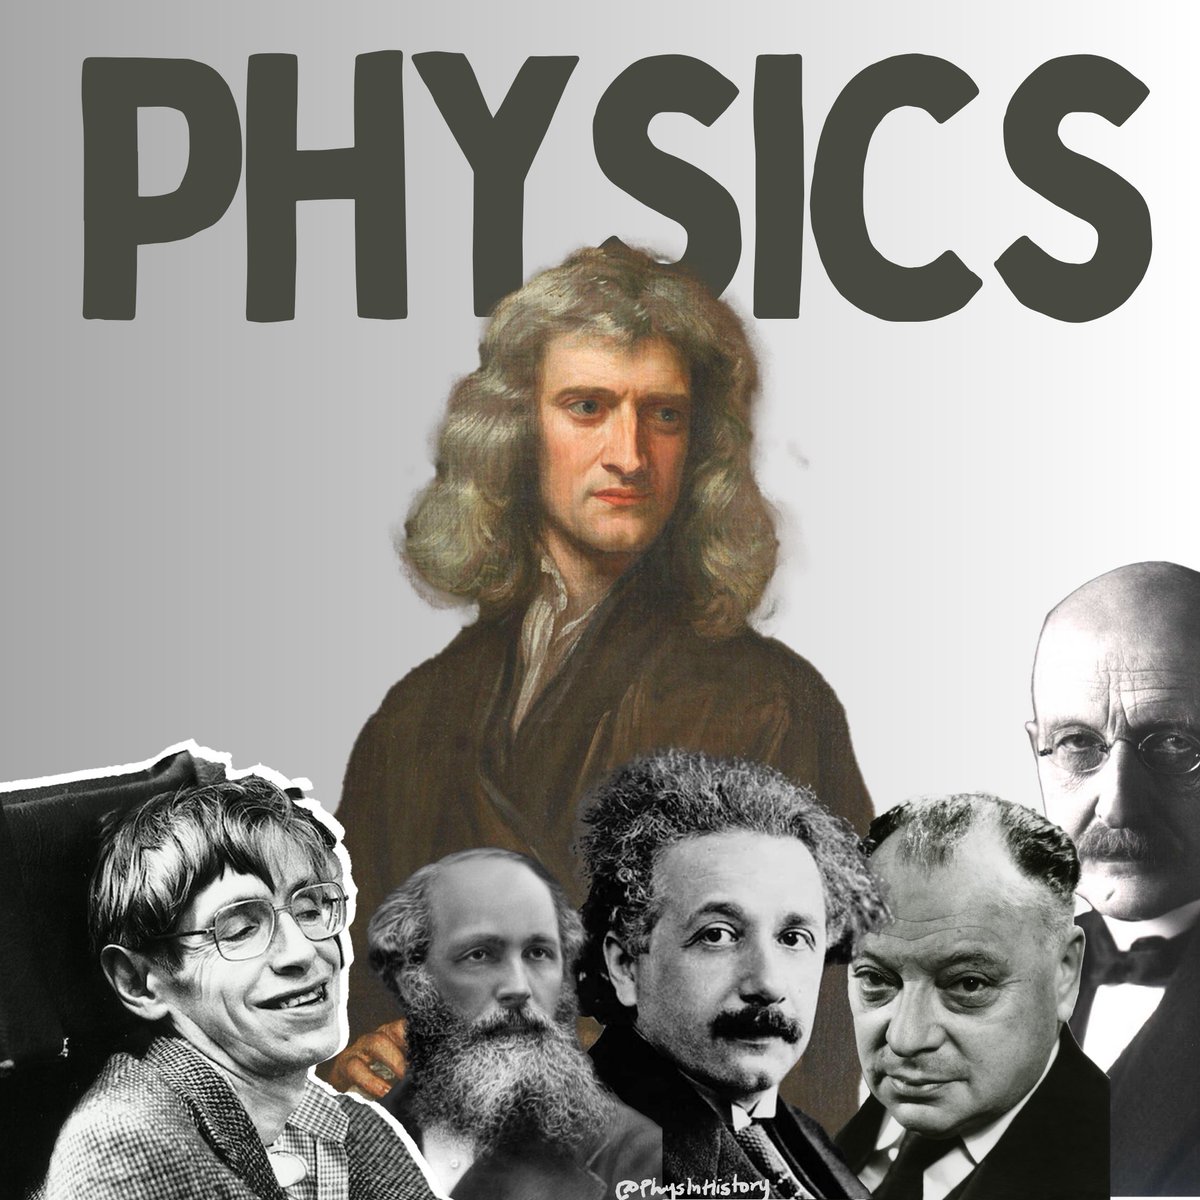 A Brief History of Physics From ancient Greece to Astroparticle Physics.

(with book recommendations to explore each era in more depth 📚)

A Thread 👇